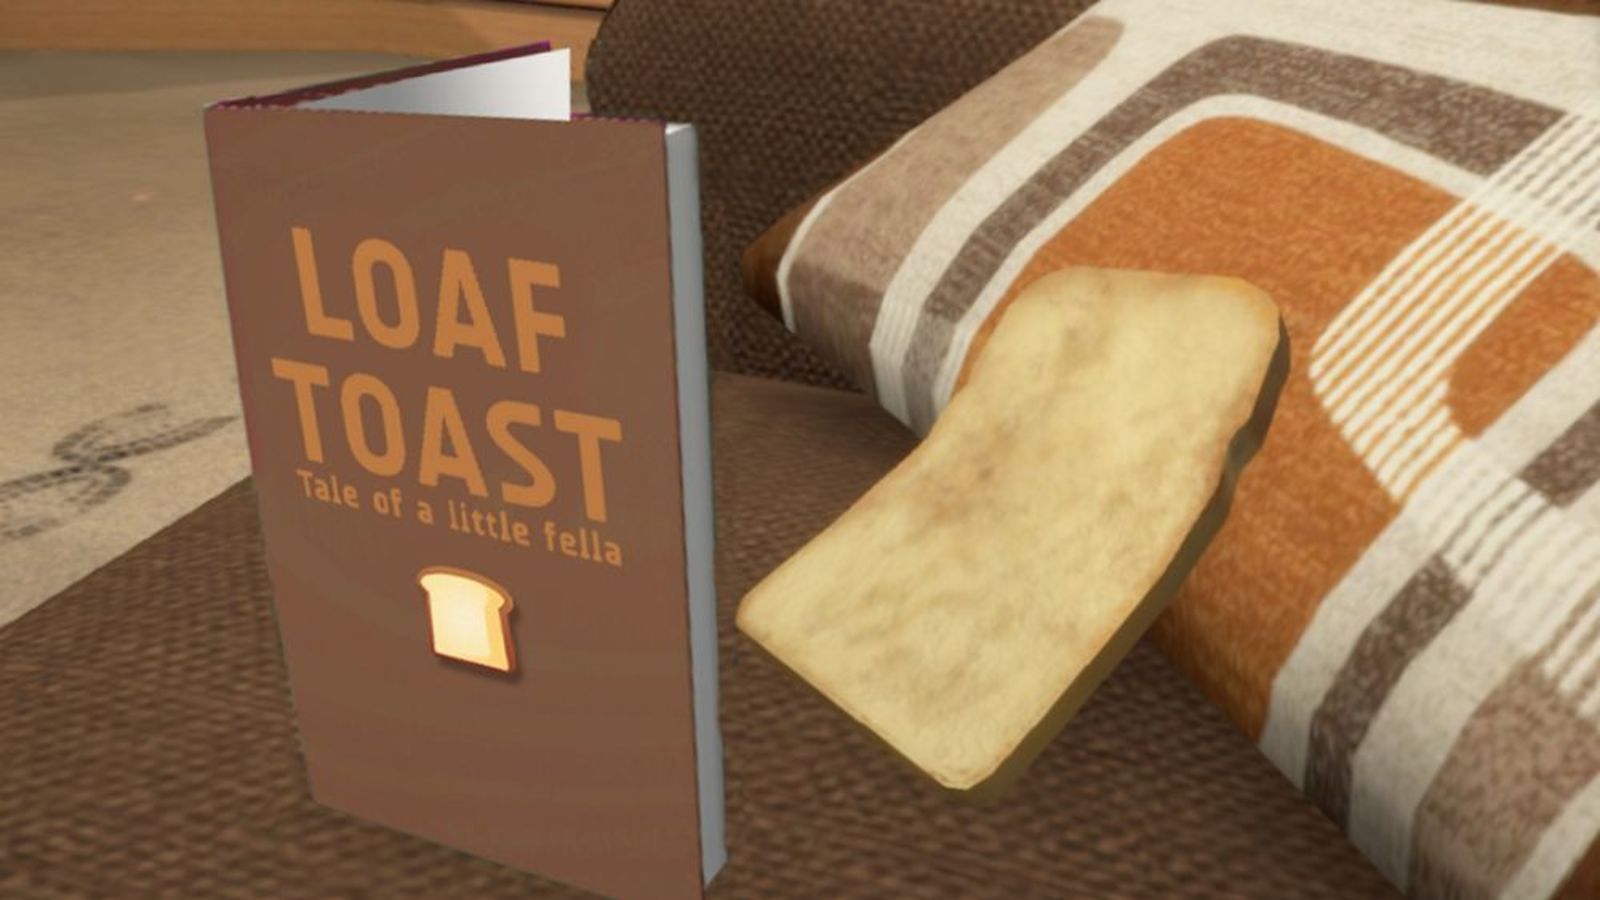 I Am Bread arrives on Steam at 25% off along with content update